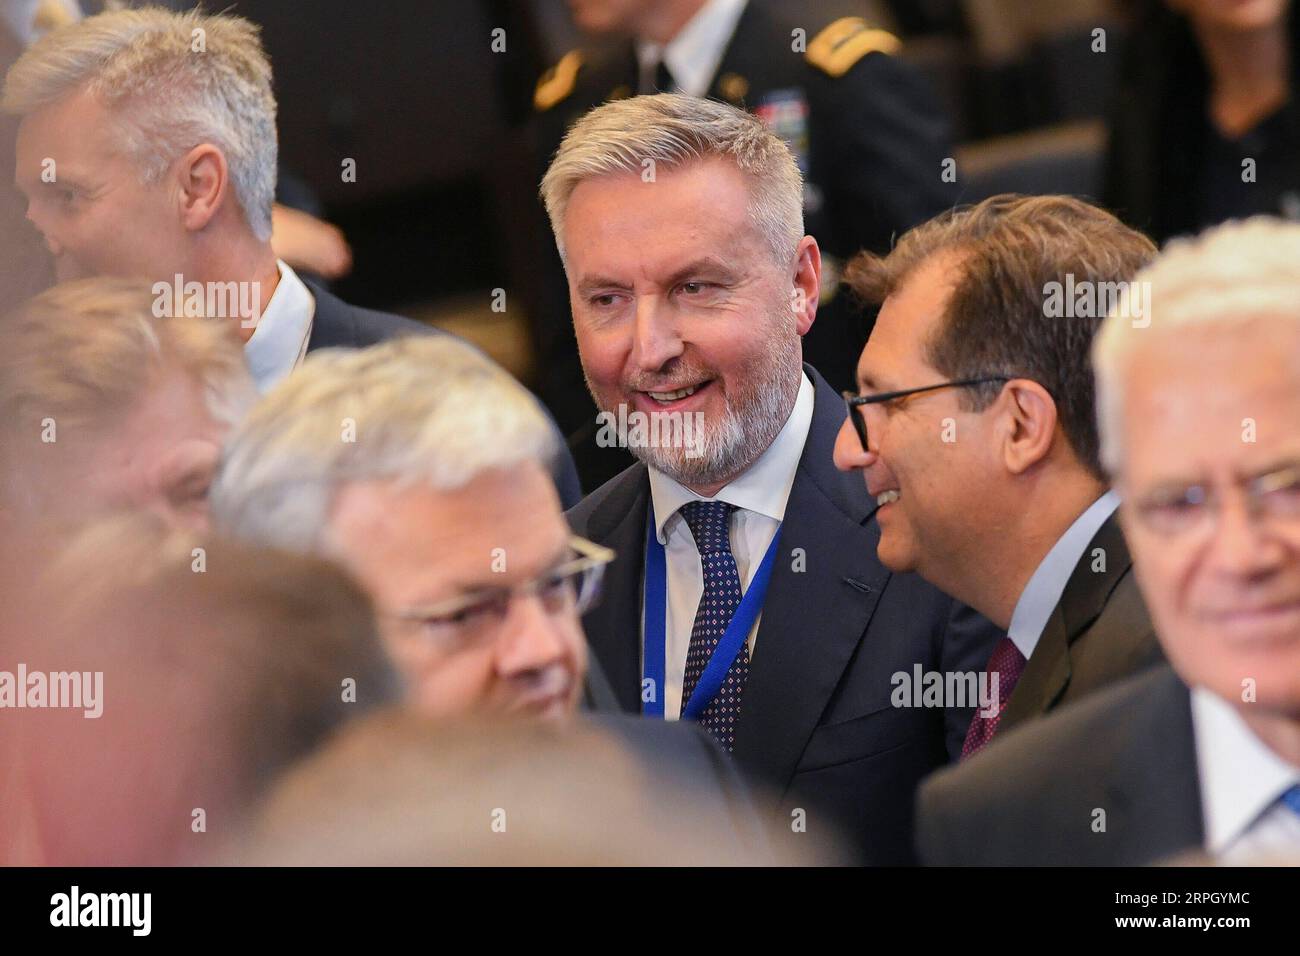 191024 -- BRUSSELS, Oct. 24, 2019 -- Italian Defense Minister Lorenzo Guerini 3rd R attends the Meeting of the North Atlantic Council at Defense Ministers session at the NATO headquarters in Brussels, Belgium, on Oct. 24, 2019. Photo by /Xinhua BELGIUM-BRUSSELS-NATO-DM-MEETING RICCARDOxPAREGGIANI PUBLICATIONxNOTxINxCHN Stock Photo